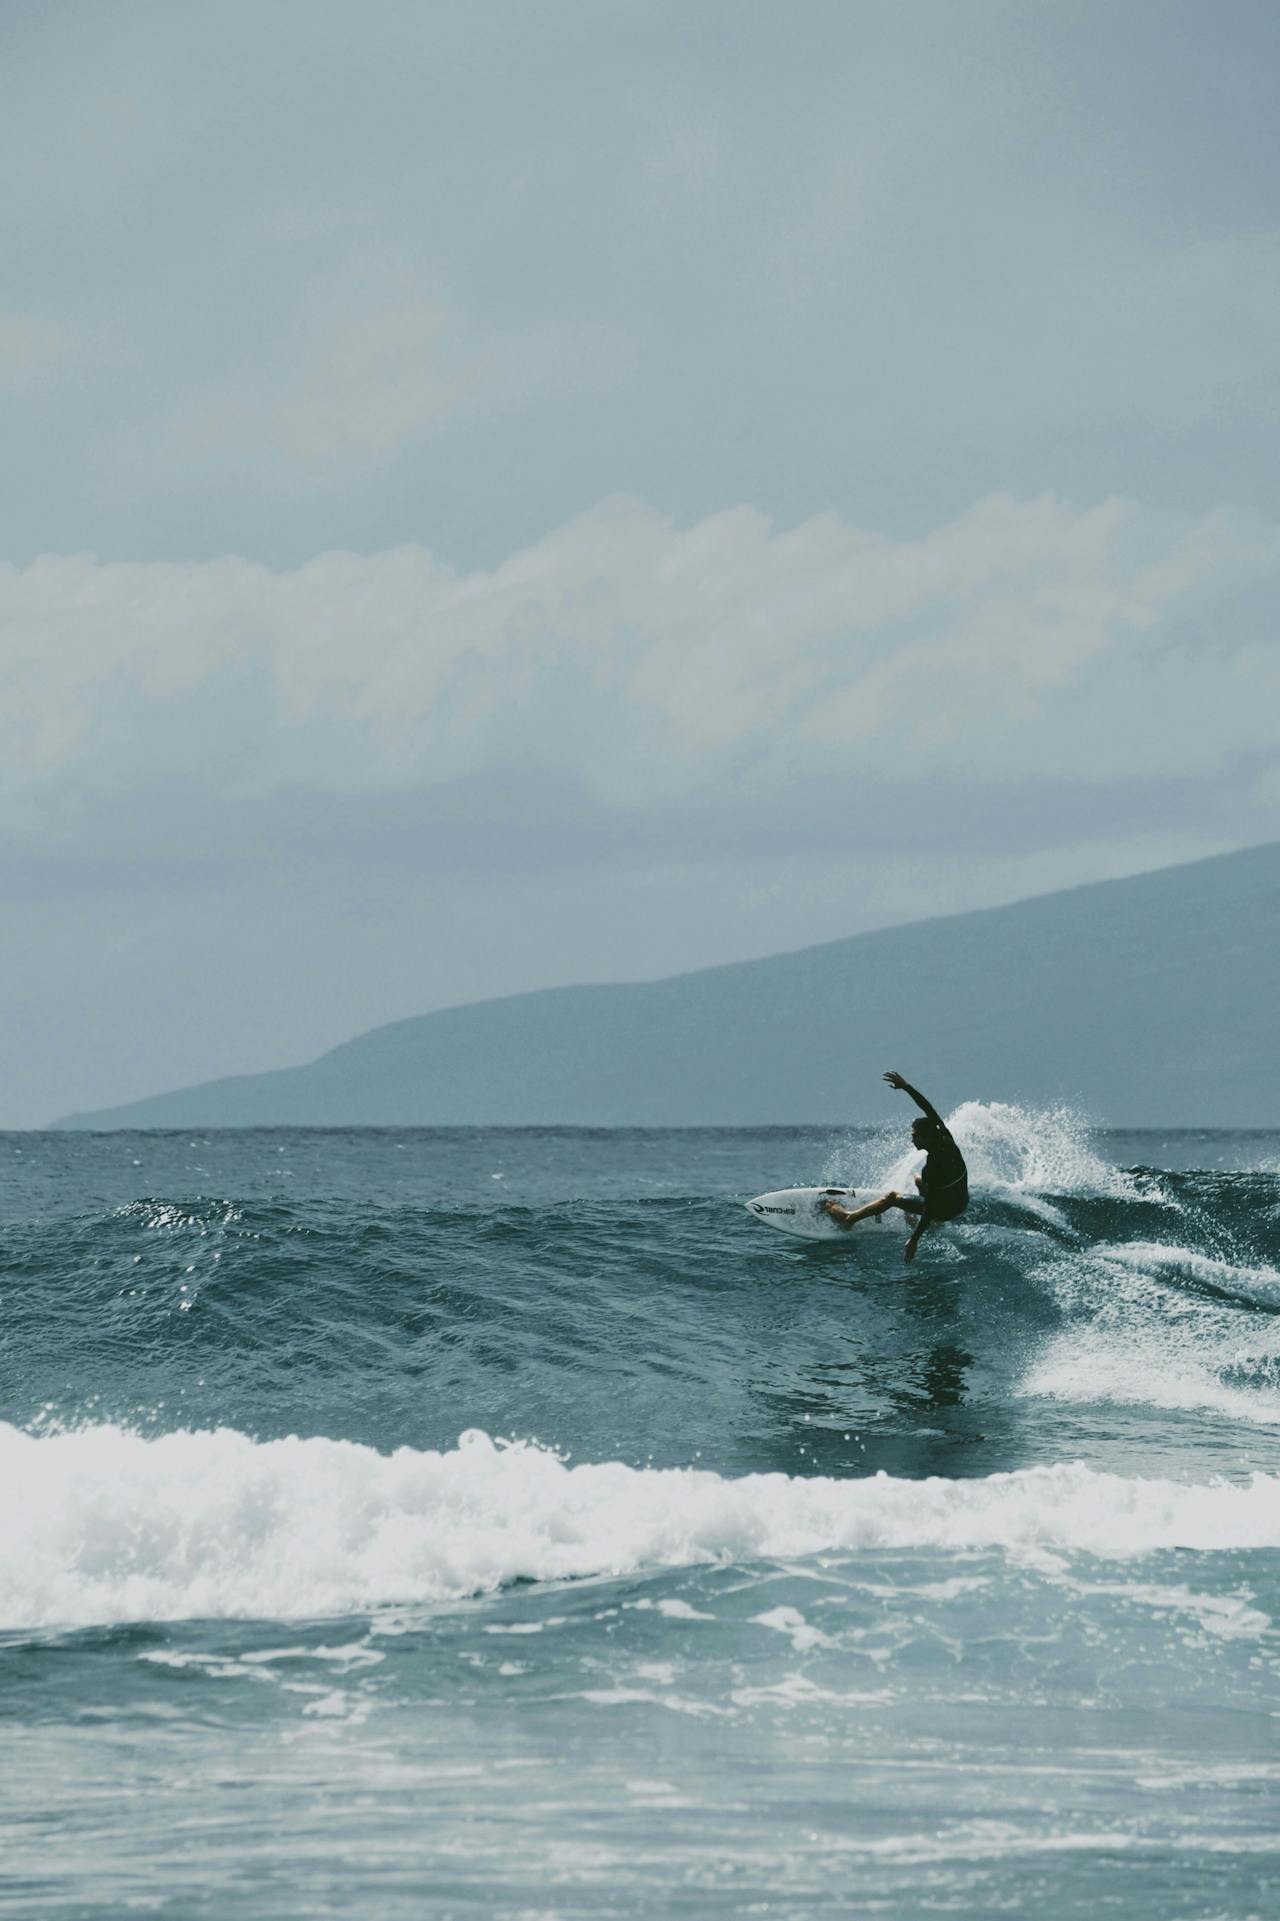 Surfing in one of the beaches of Lahaina.